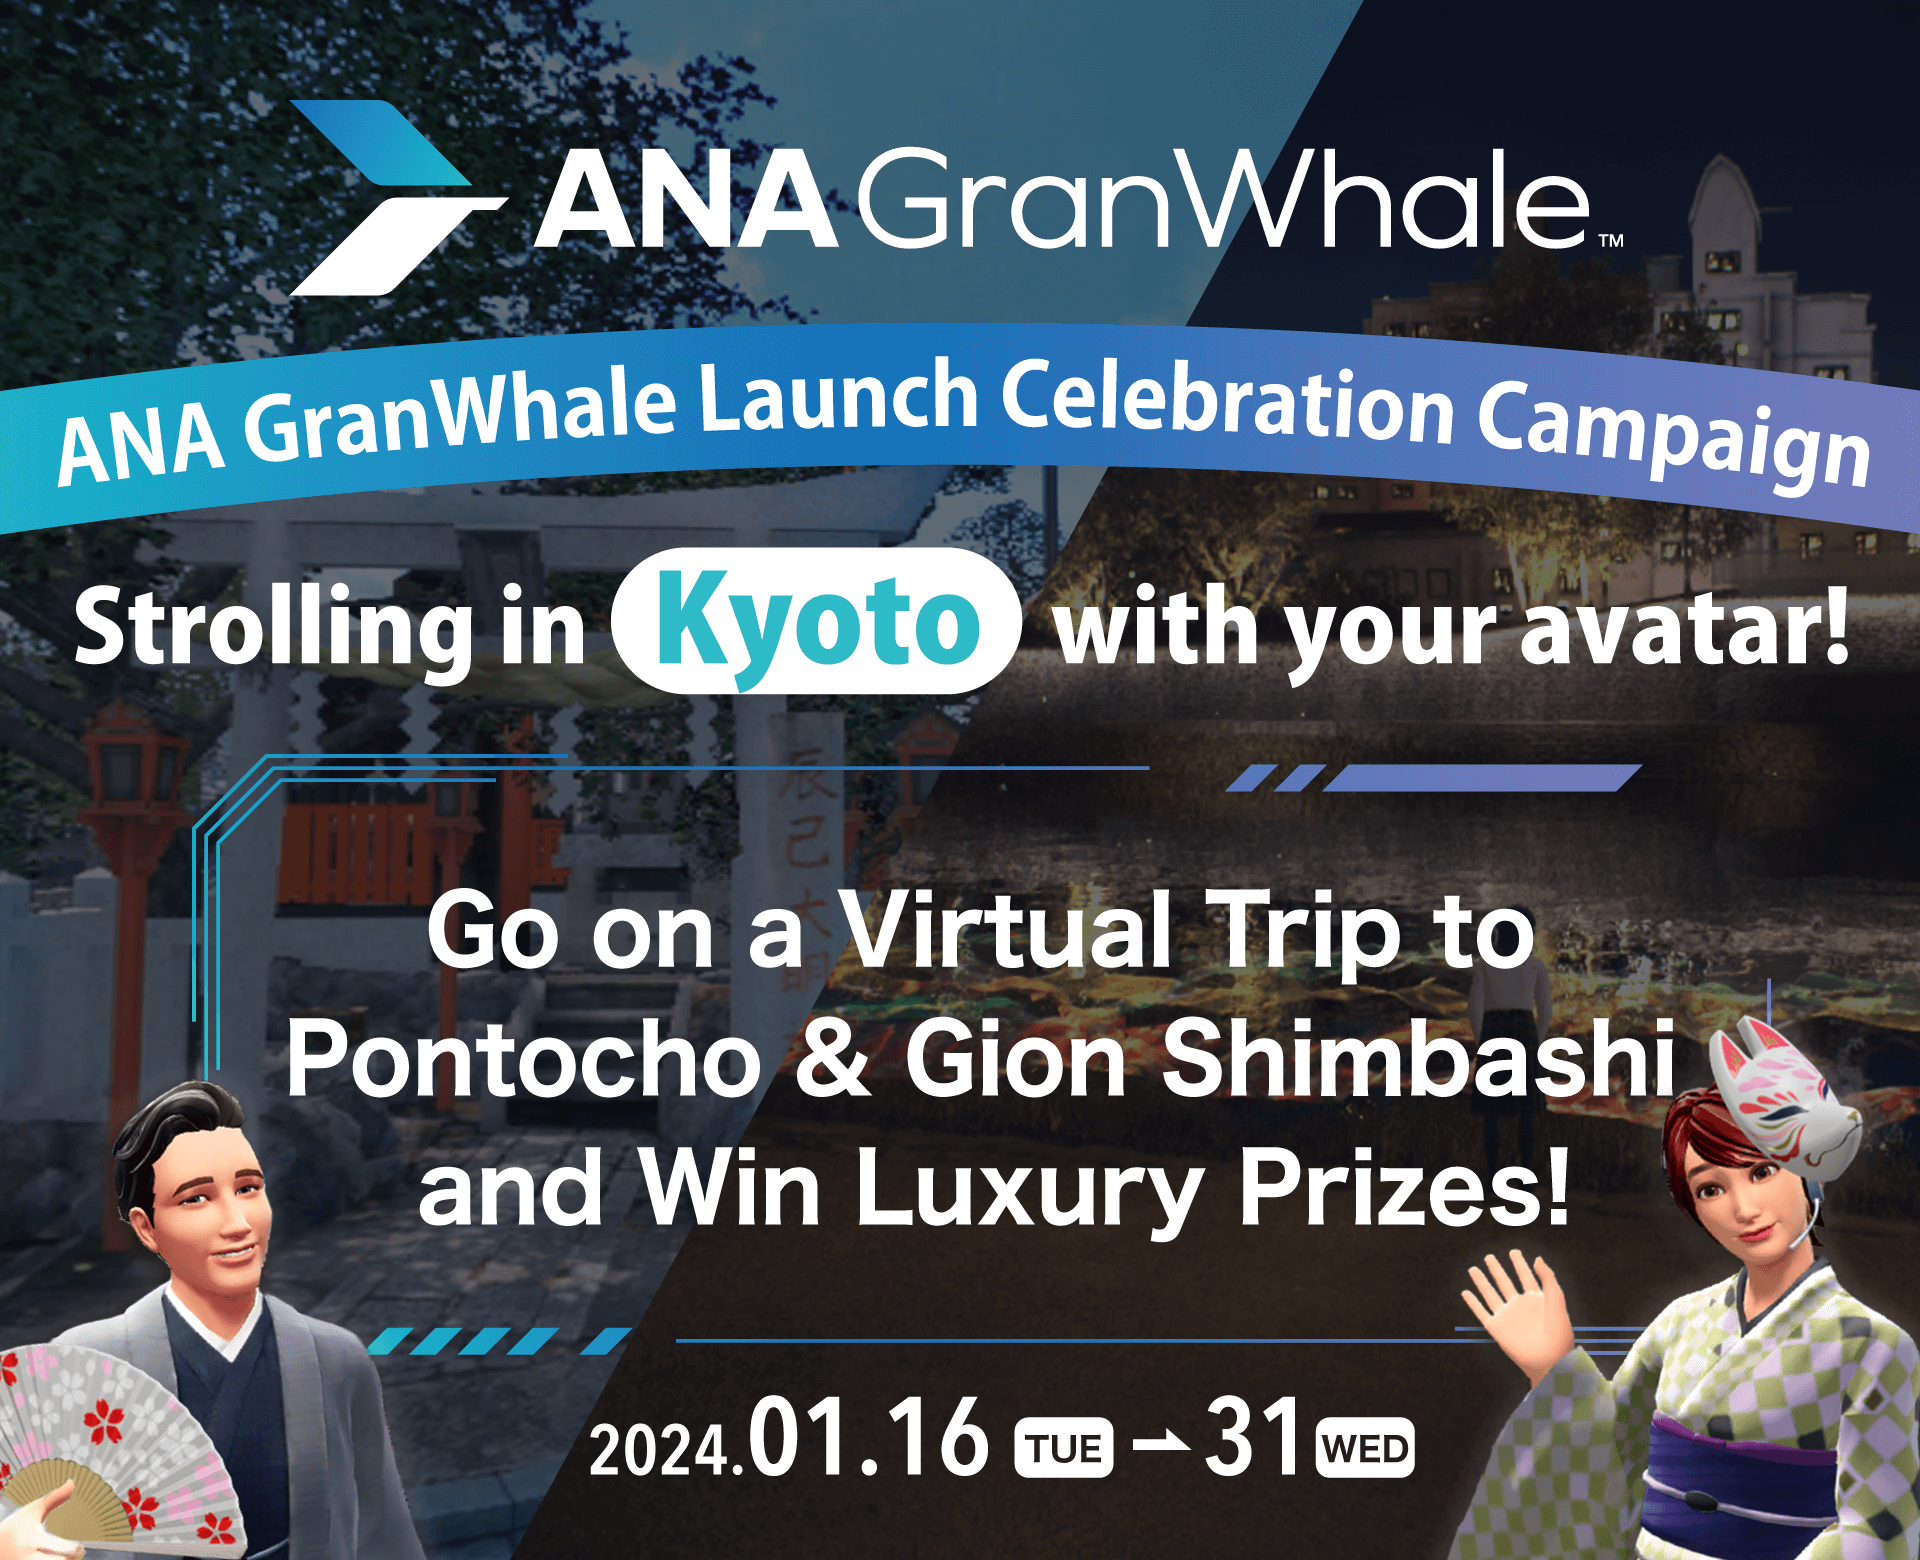 ANA GranWhale Launch Celebration Campaign! Onboard for a virtual trip to Kyoto and win luxury prizes! ~ A digital stamp collection event to get special rewards in real sightseeing is also ongoing! ~